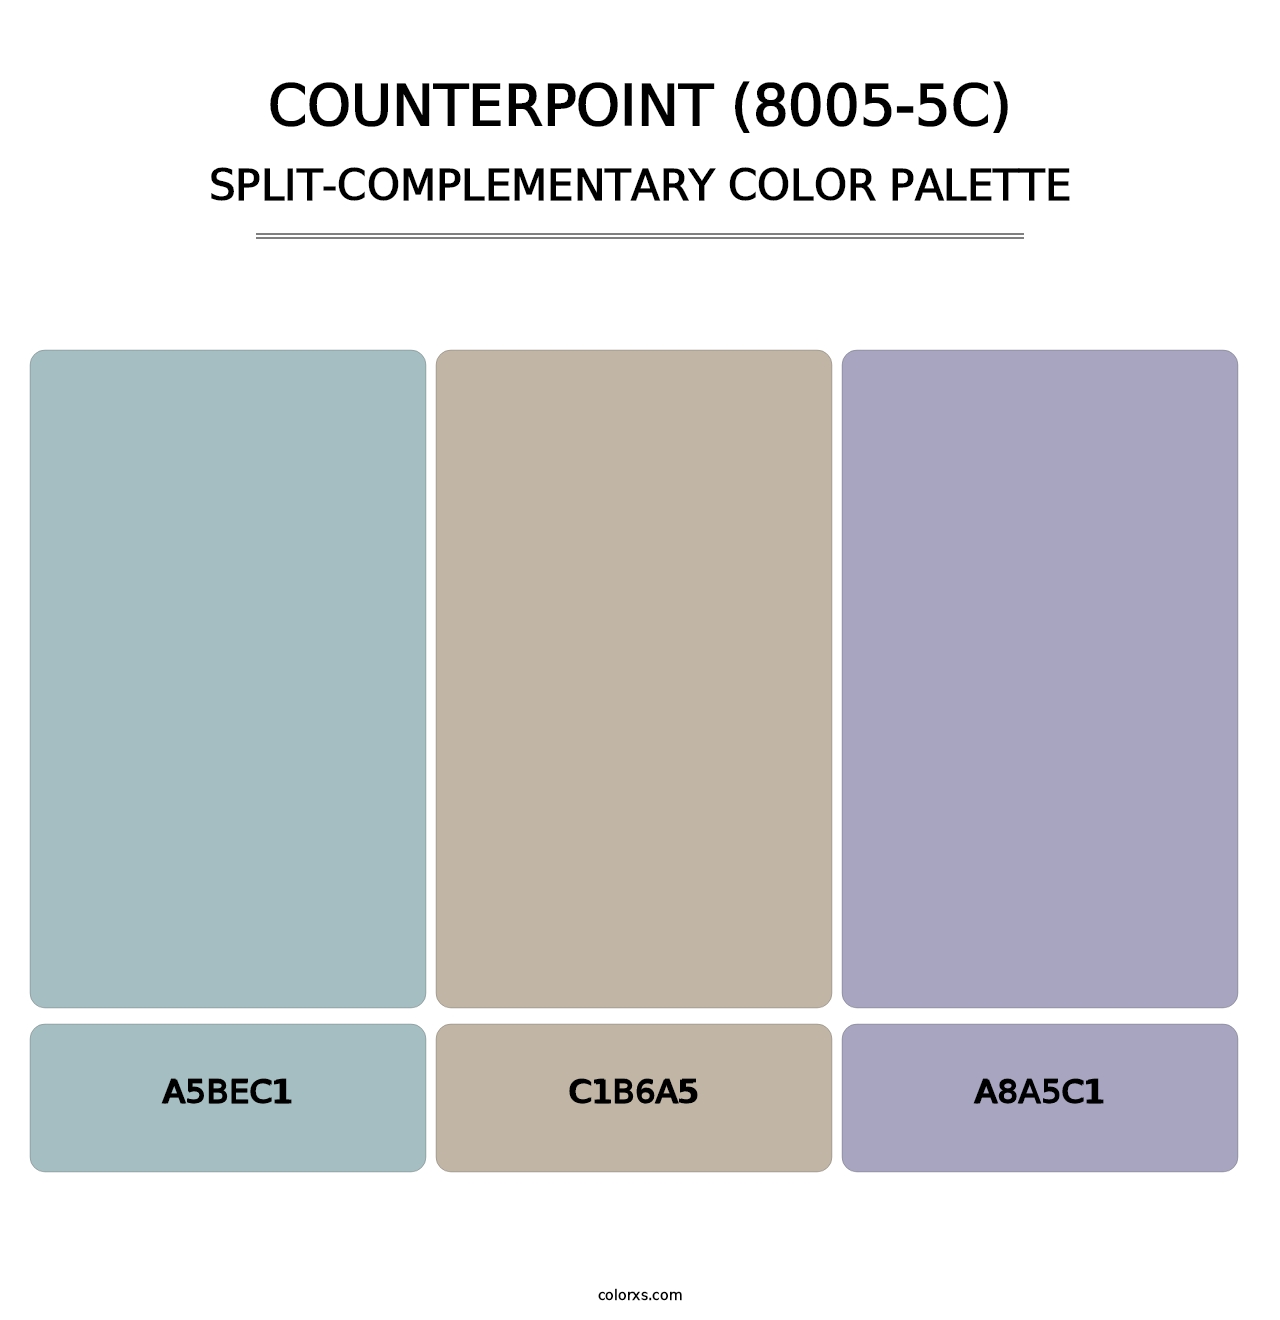 Counterpoint (8005-5C) - Split-Complementary Color Palette